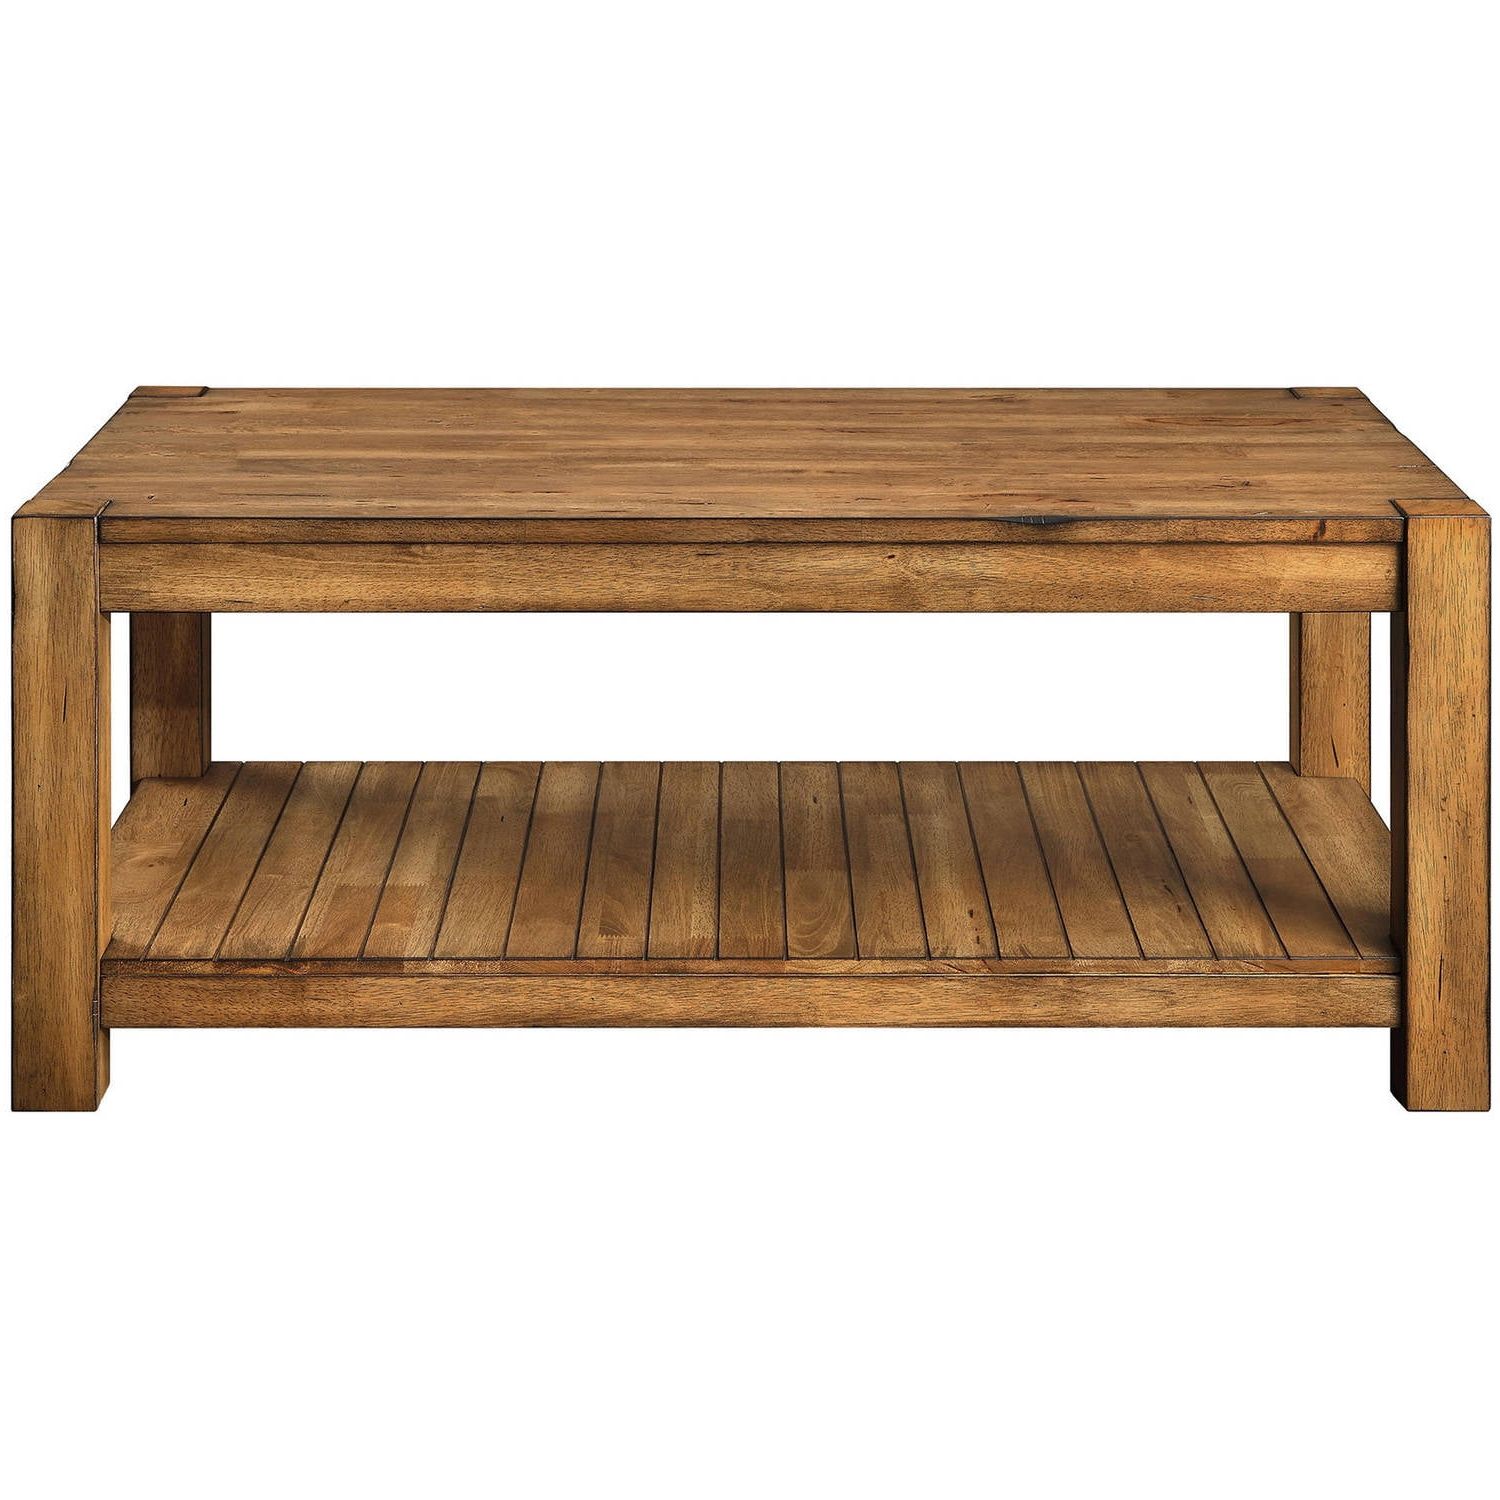 2019 Brown Rustic Coffee Tables With Buy Better Homes & Gardens Bryant Solid Wood Coffee Table, Rustic Maple (View 7 of 15)